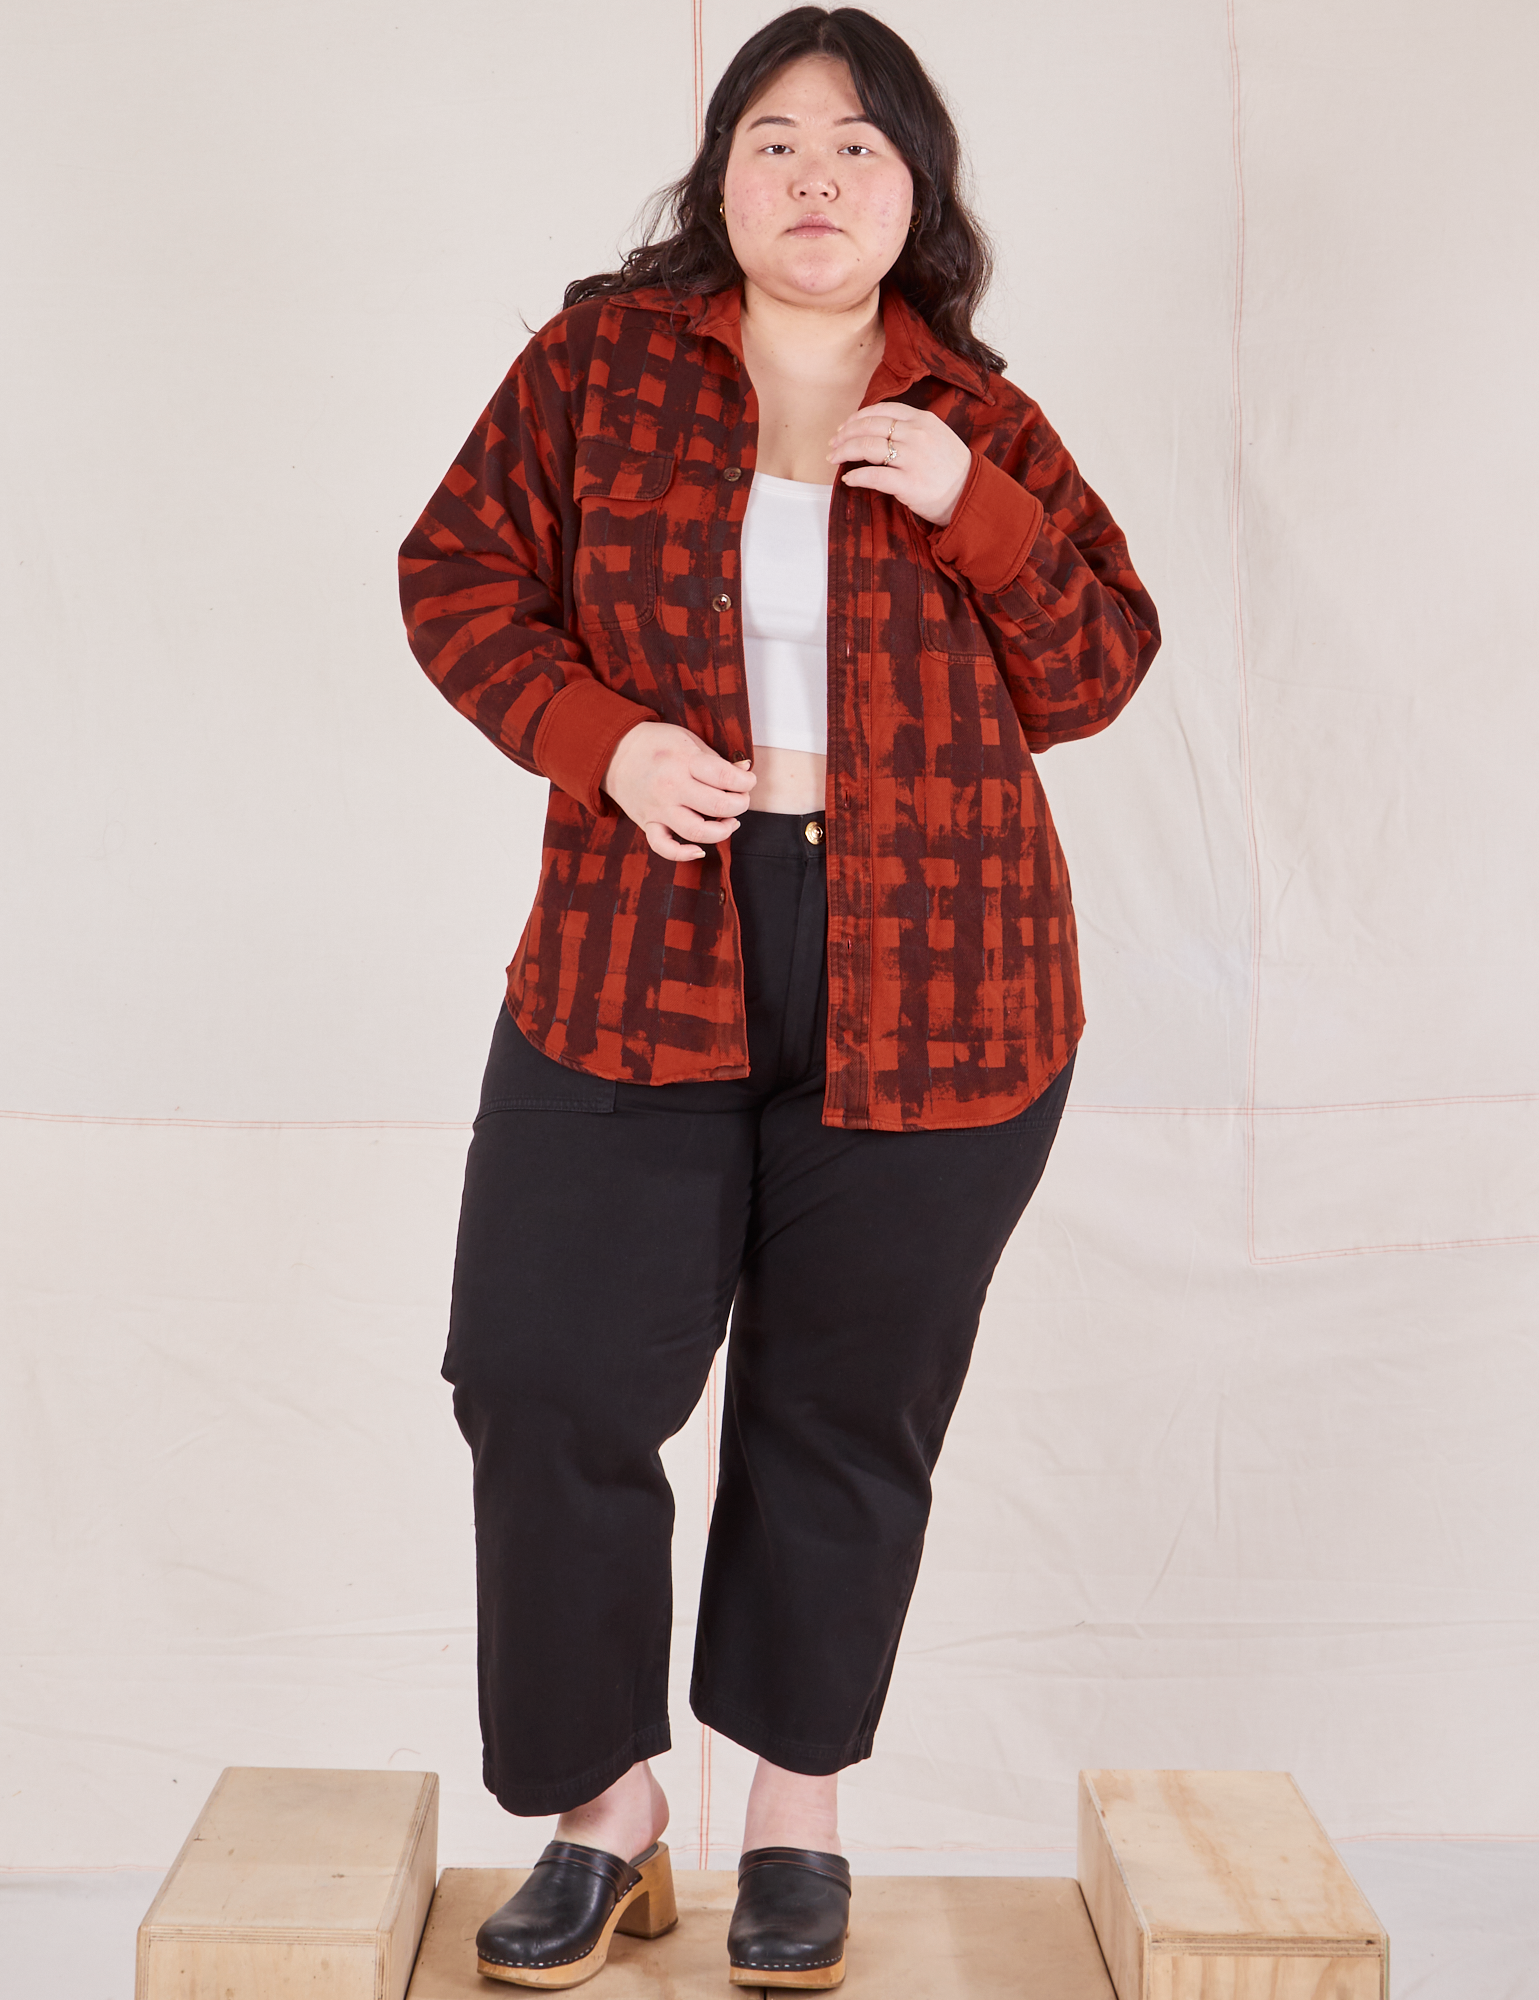 Ashley is 5&#39;7&quot; and wearing M Plaid Flannel Overshirt in Paprika paired with black Work Pants